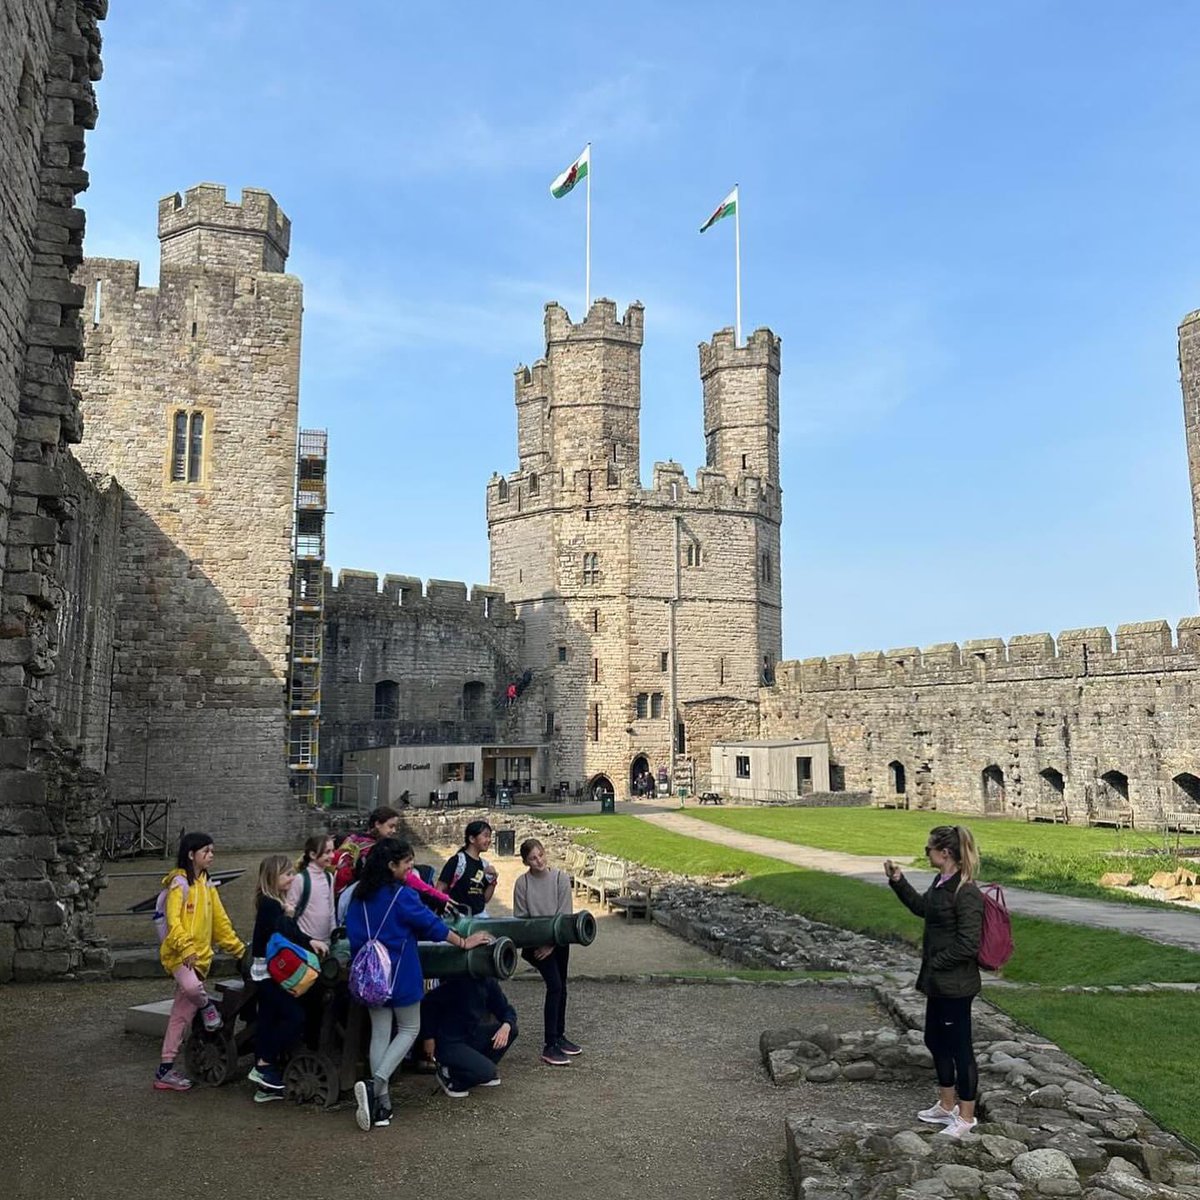 Our group visits can combine our range of #Adventure activities & learning more about the rich culture and heritage we have in North Wales We are minutes from Caernarfon Castle, the Eryri National Park & Yr Wyddfa and much more. Contact us for more information #findyourepic